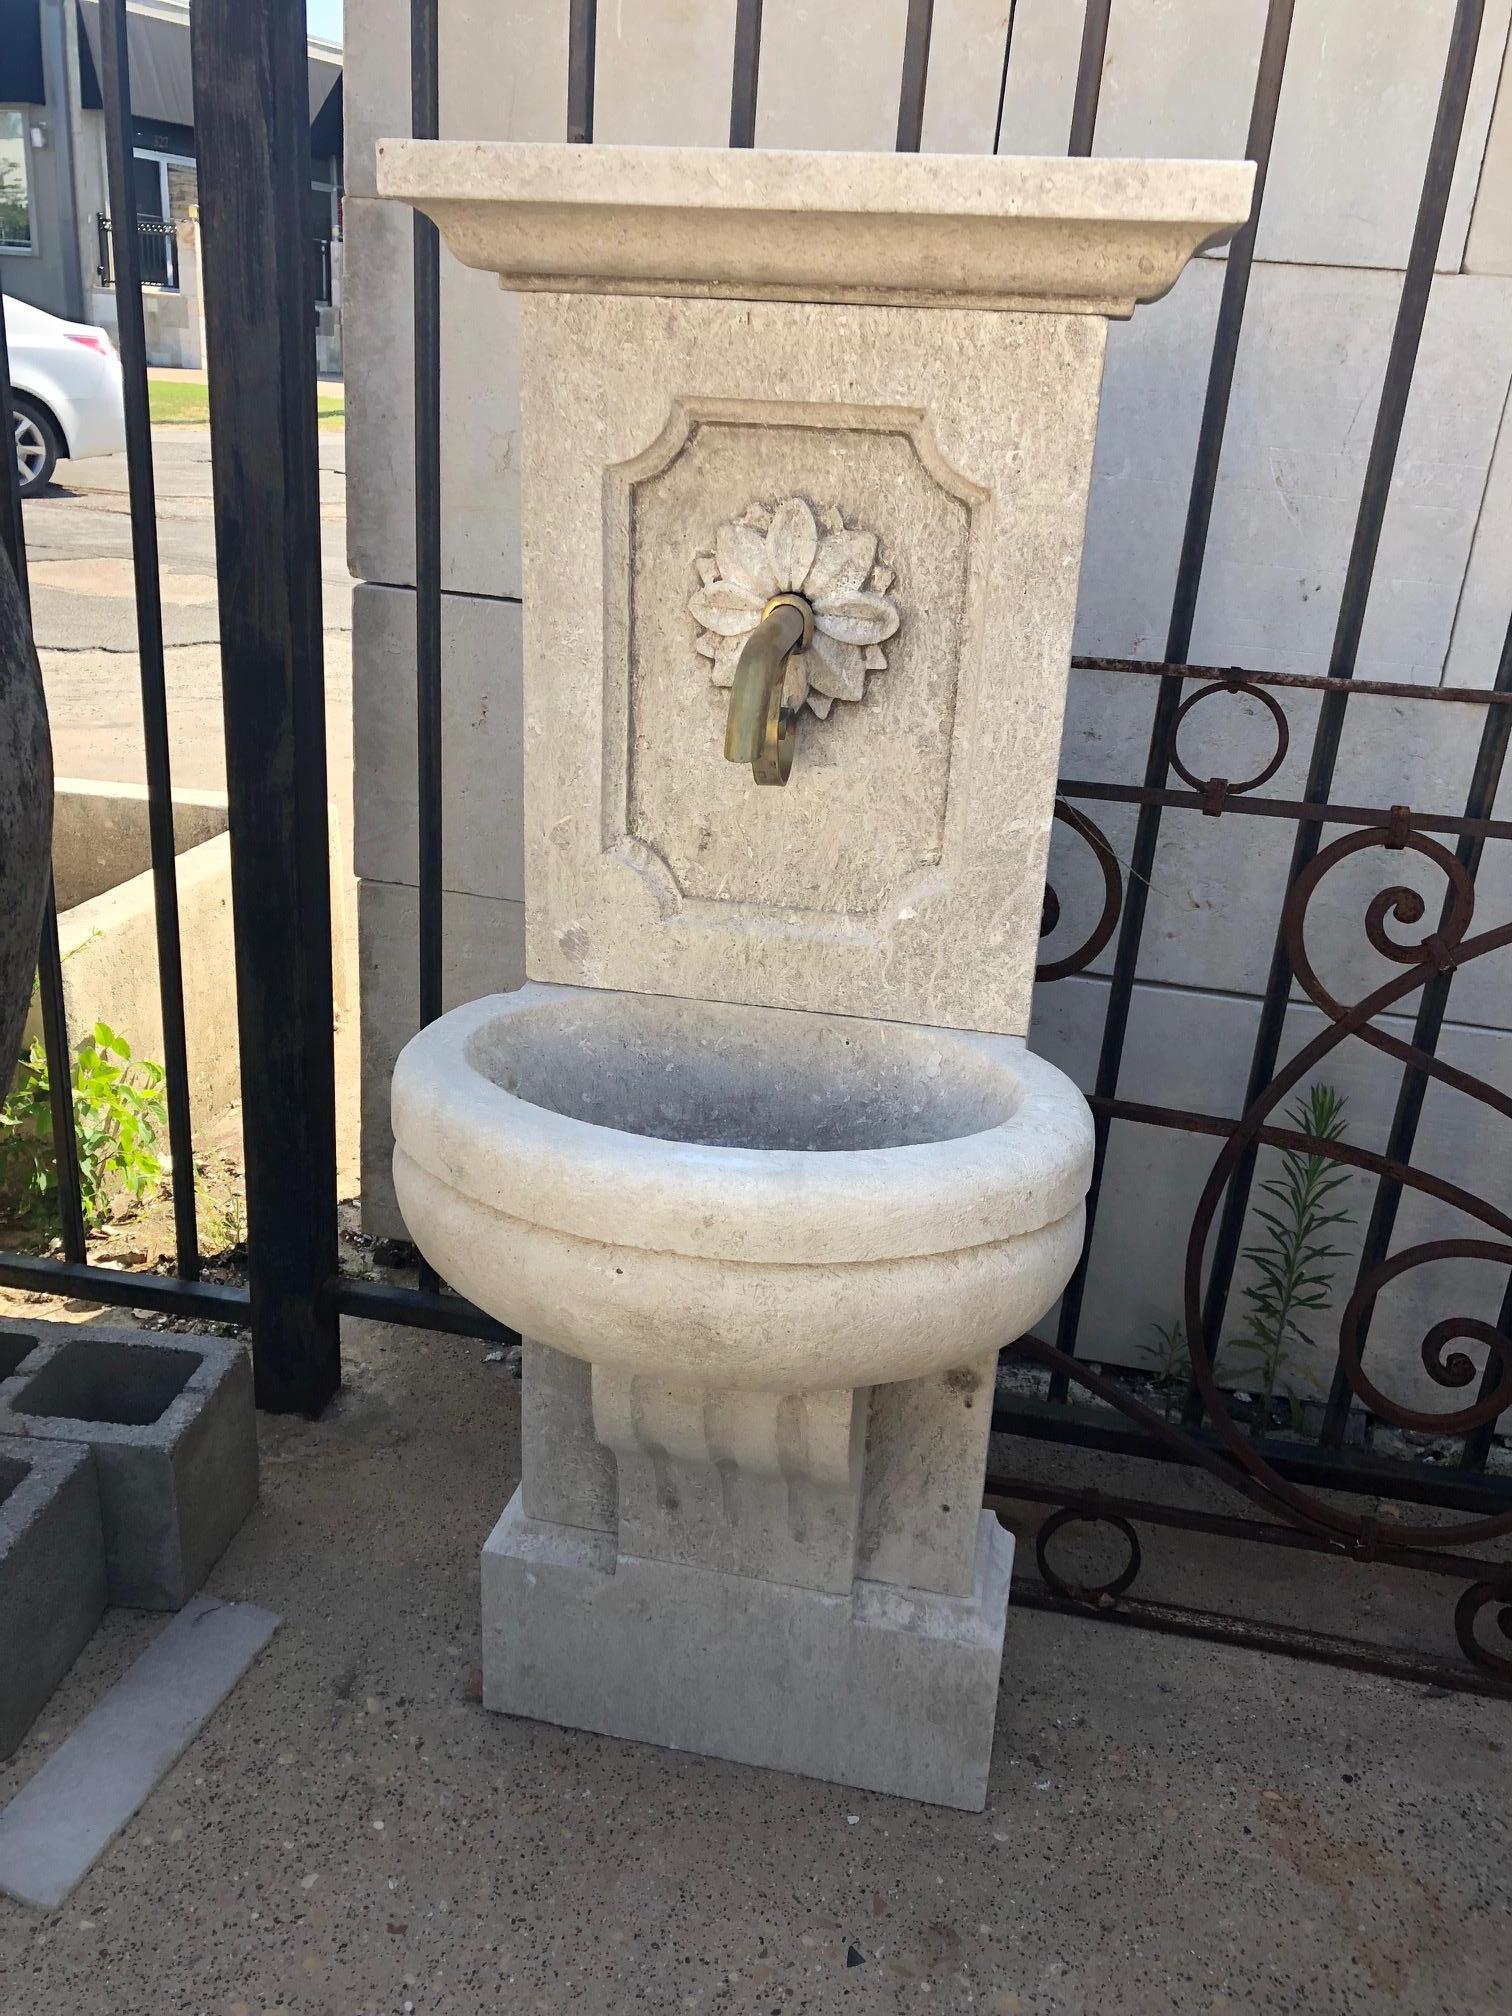 This petite limestone wall fountain was hand carved in France and features a flower motif as the focal point and flute design on the curved stand.

Origin: France

Measurements: 4'4